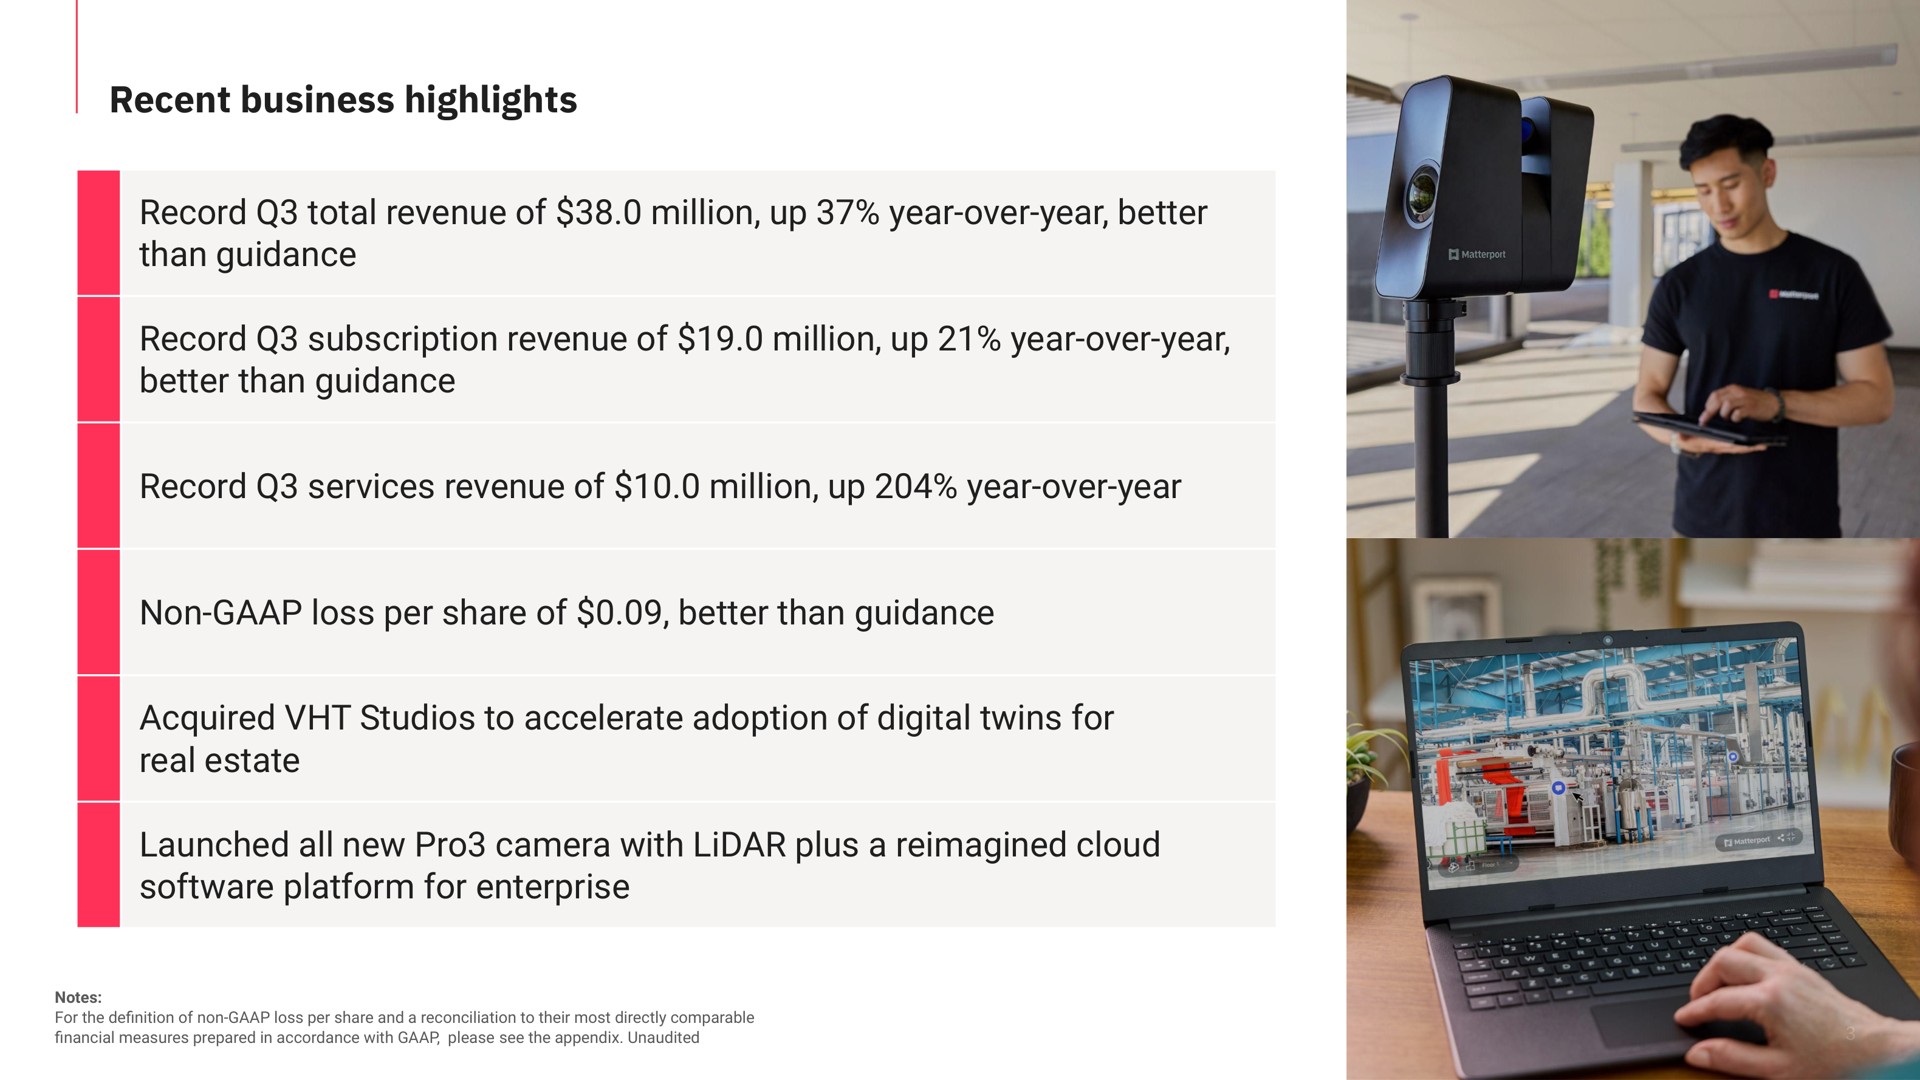 recent business highlights record total revenue of million up year over year better than guidance record subscription revenue of million up year over year better than guidance record services revenue of million up year over year non loss per share of better than guidance acquired studios to accelerate adoption of digital twins for real estate launched all new pro camera with plus a cloud platform for enterprise | Matterport